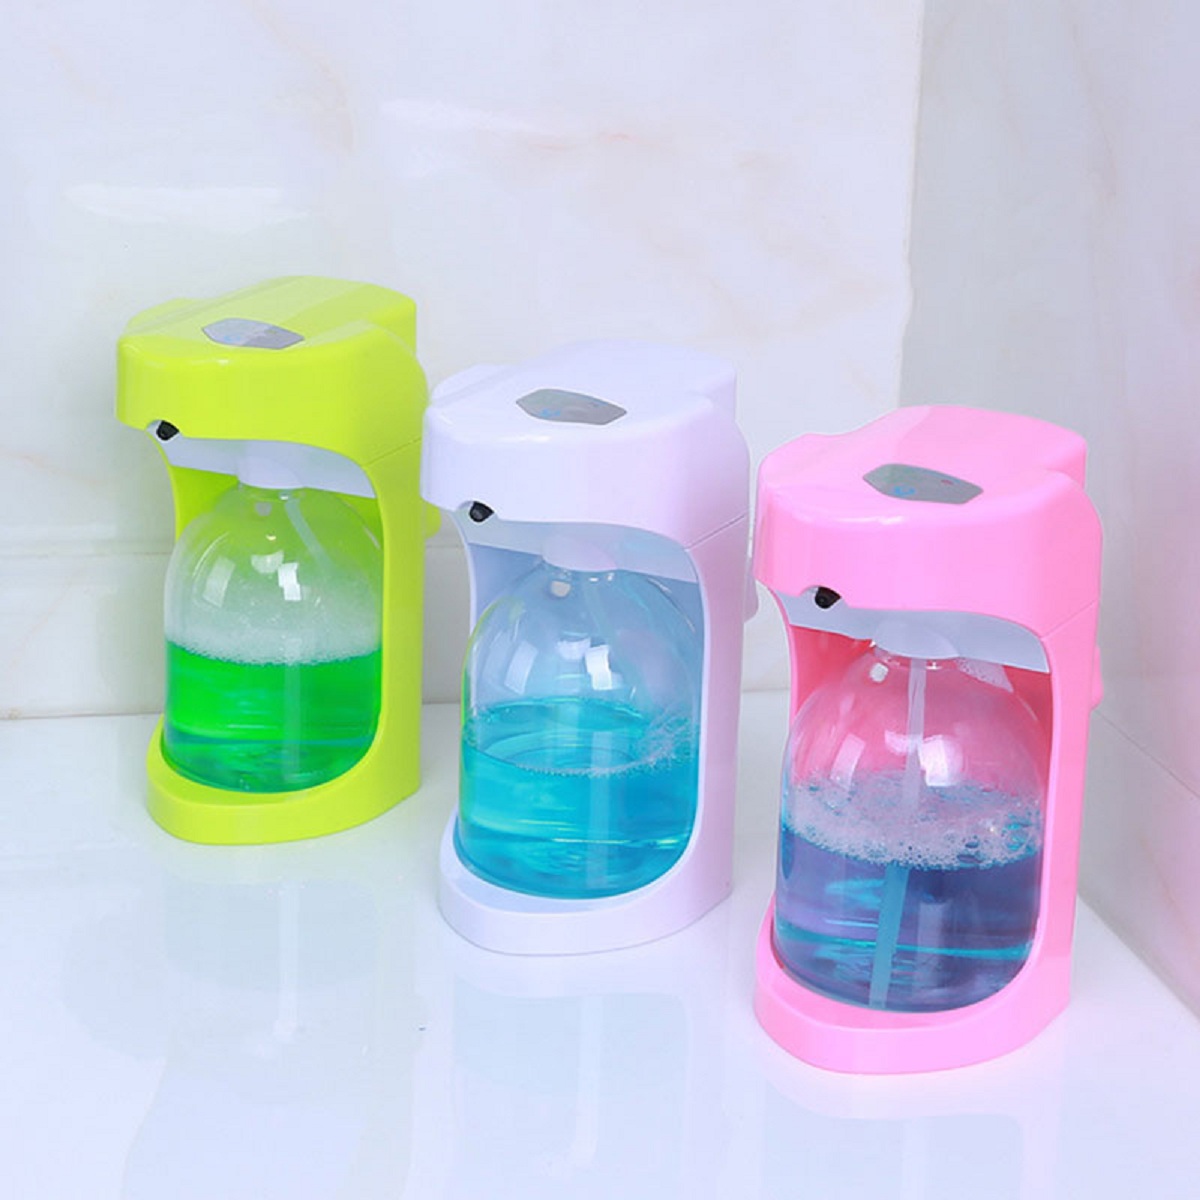 Automatic-Foam-Hand-Washing-Machine-Induction-Soap-Dispenser-Liquid-Bottle-Stand-Wall-Hanging-Intell-1585566-5